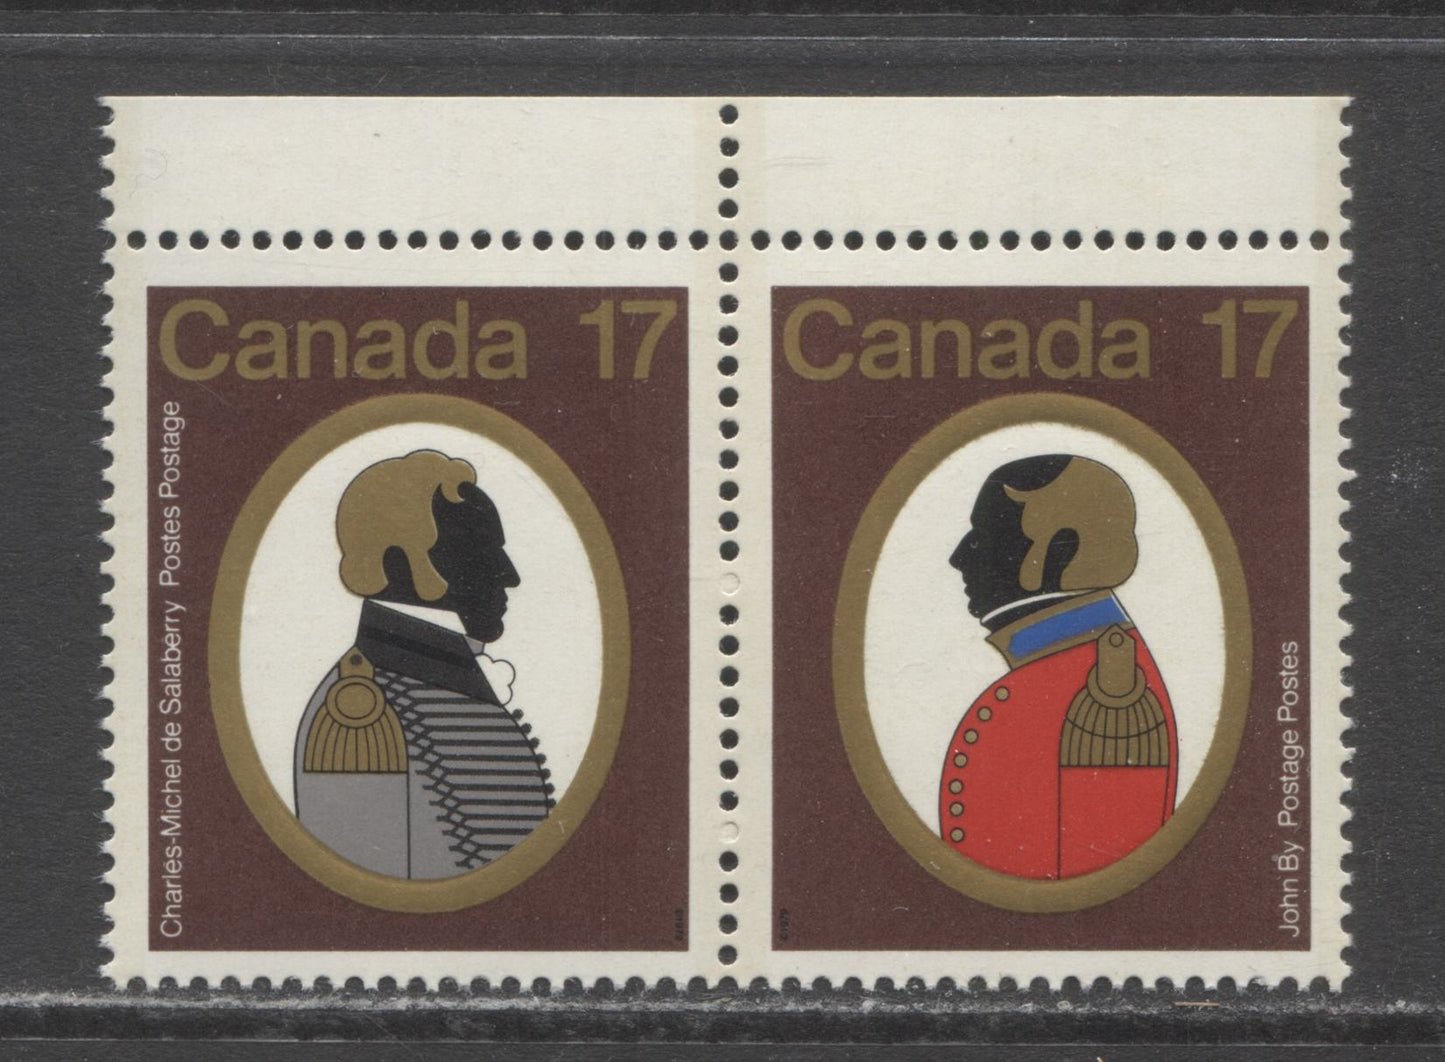 Lot 455 Canada #820avar 17c Multicolored Colonel C.M de Salaberry & Colonel John By, 1979 Canadian Colonels Issue, A VFNH Pair On DF/DF-fl Paper With Fluorescent Ink On John By's Uniform